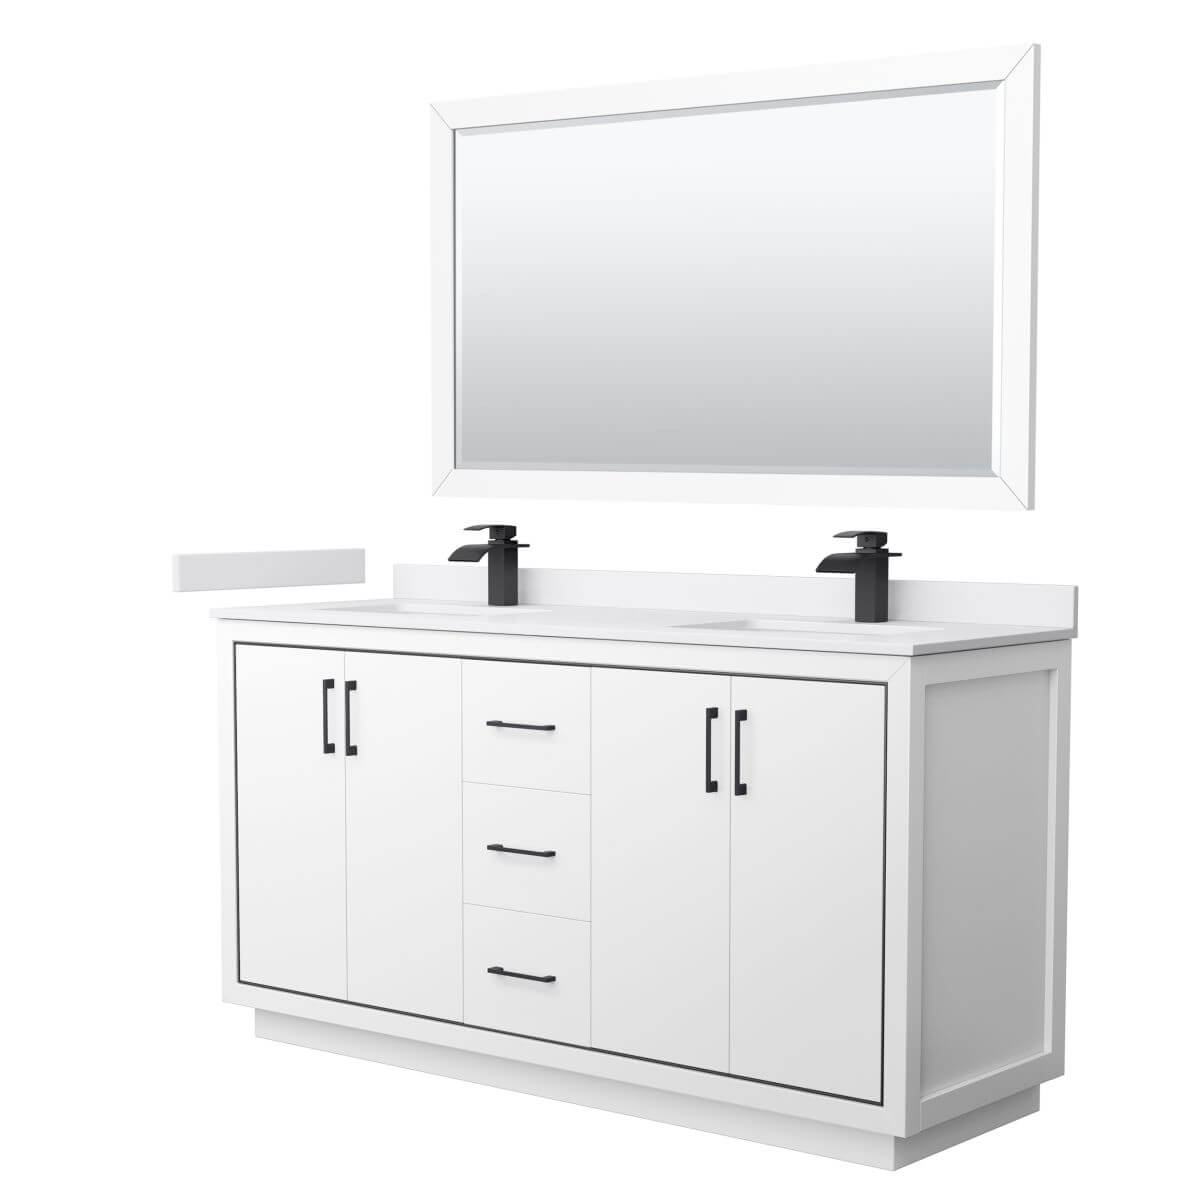 Wyndham Collection WCF111166DWBWCUNSM58 Icon 66 inch Double Bathroom Vanity in White with White Cultured Marble Countertop, Undermount Square Sinks, Matte Black Trim and 58 Inch Mirror